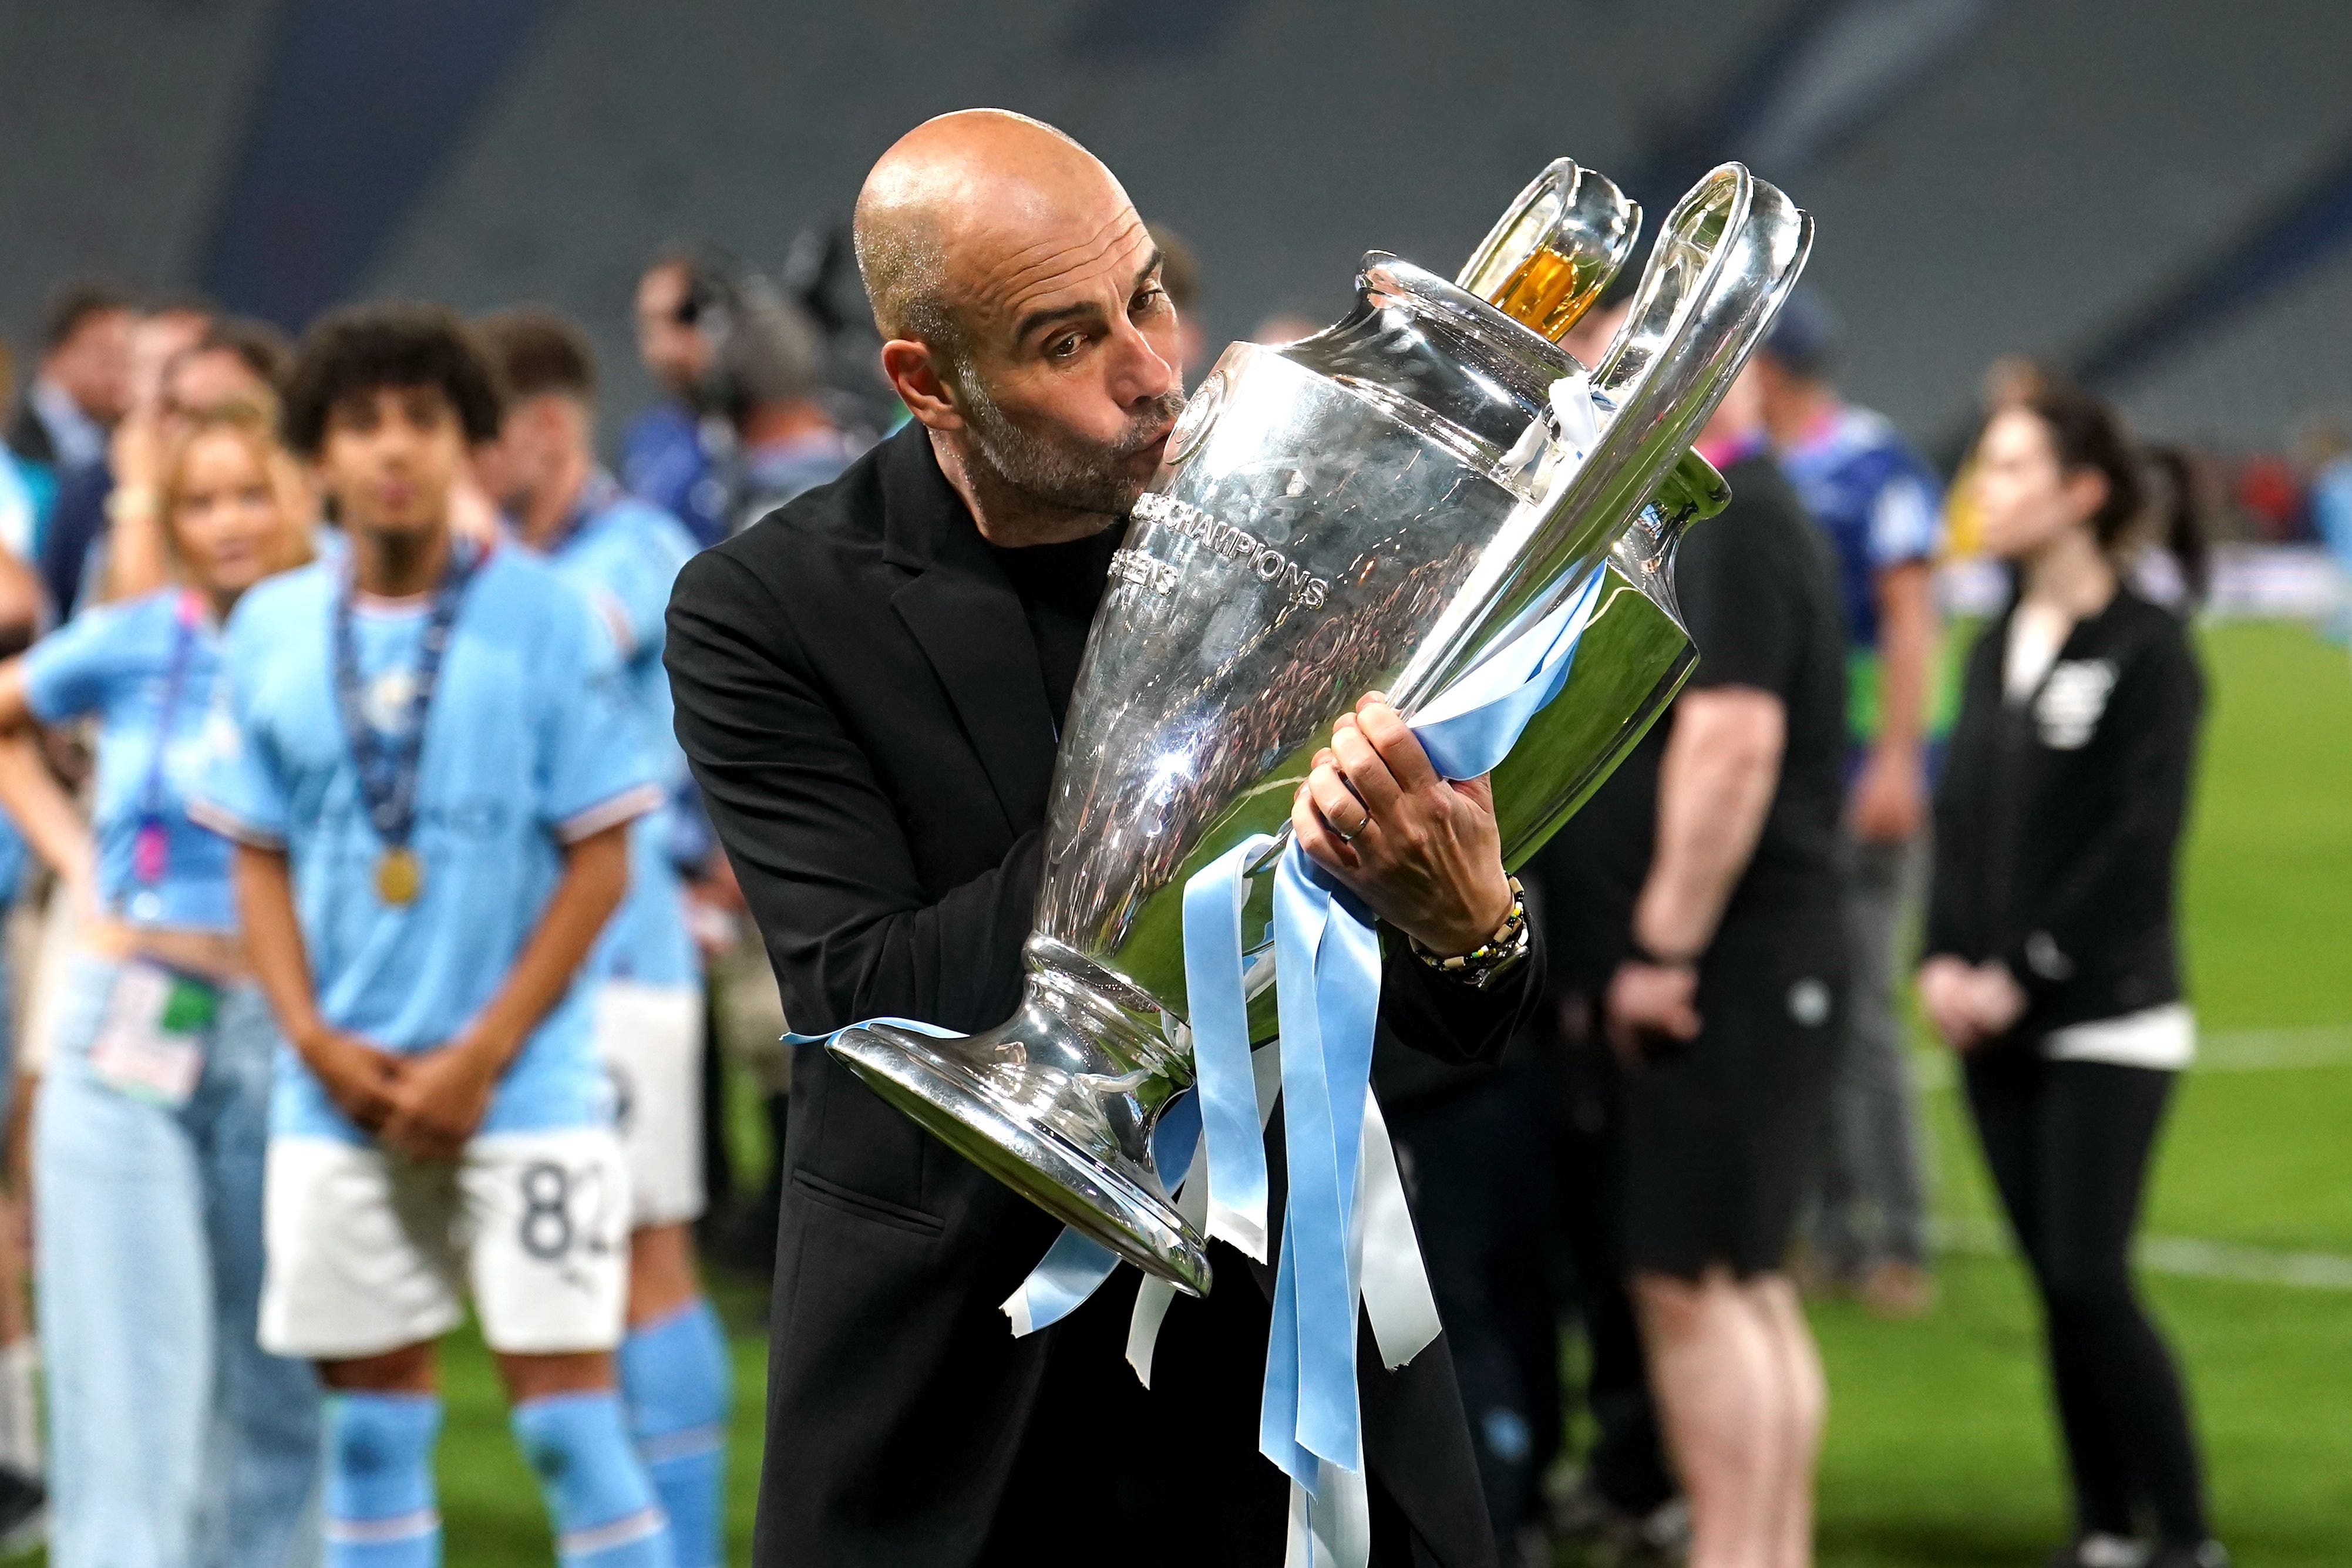 Pep Guardiola has dismissed talk of another glorious treble (Martin Rickett/PA)